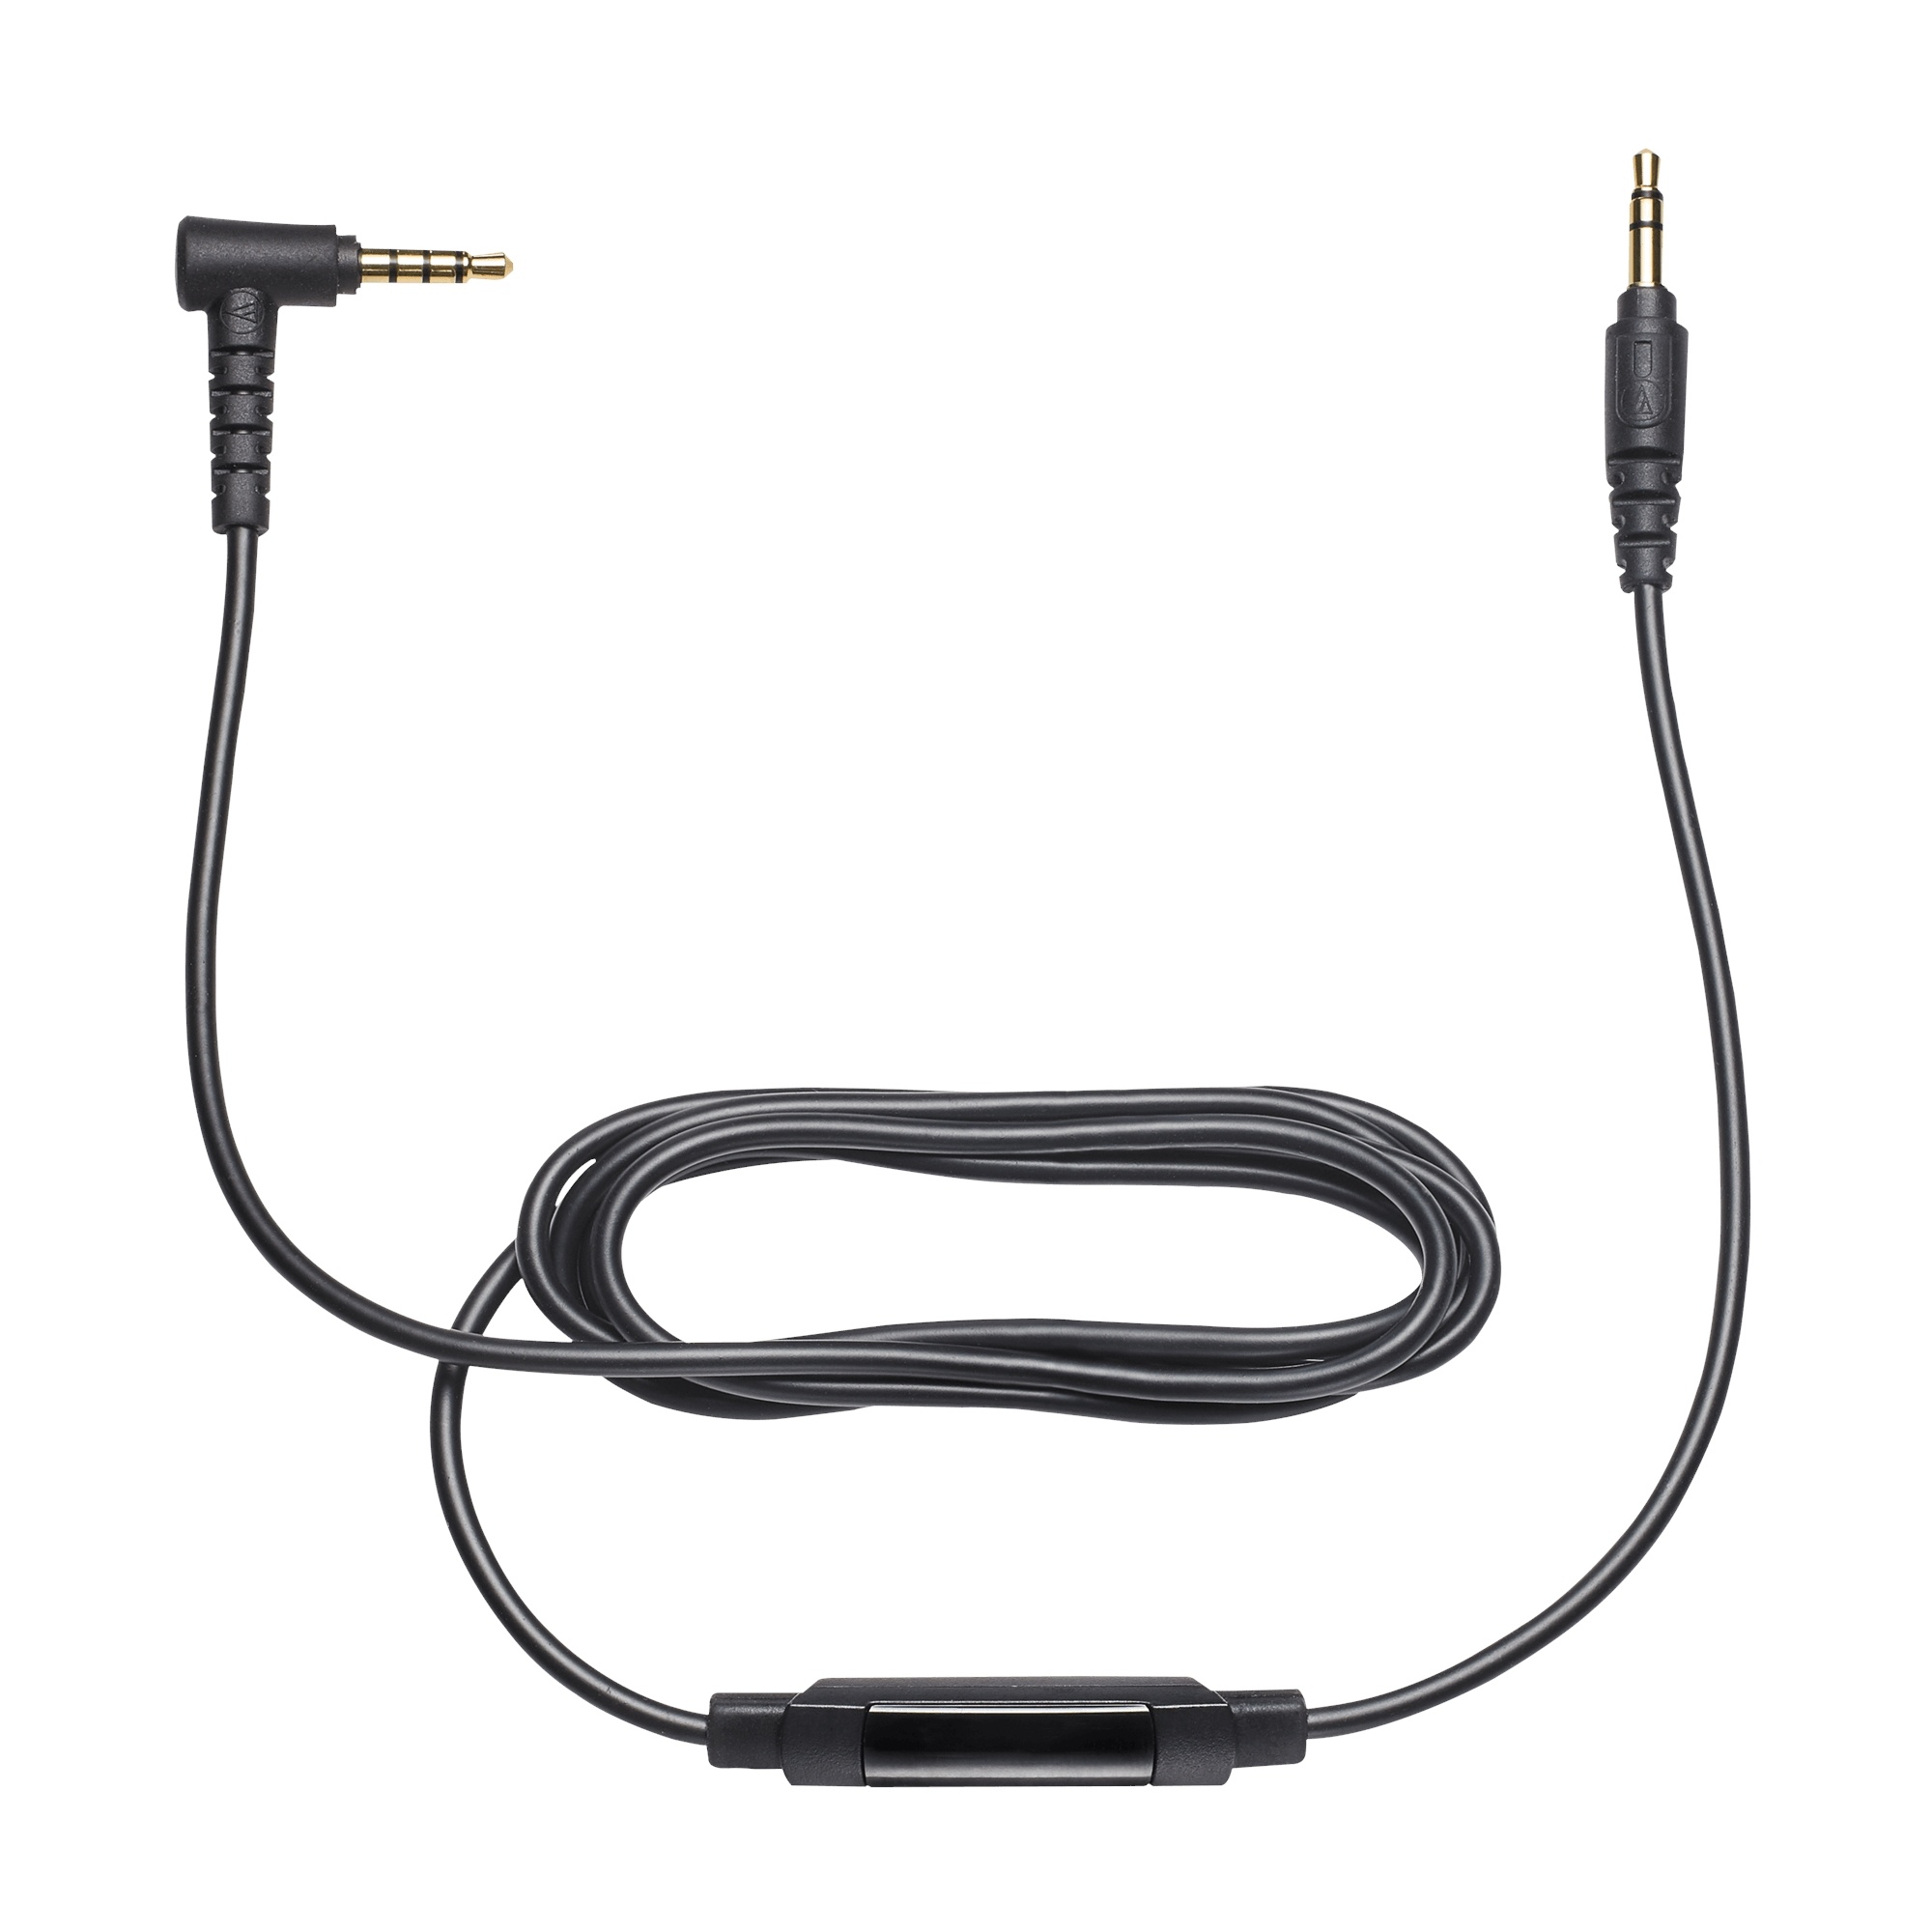 Audio-Technica Replacement Smartphone Cable for the ATH-M50xBT Headphones